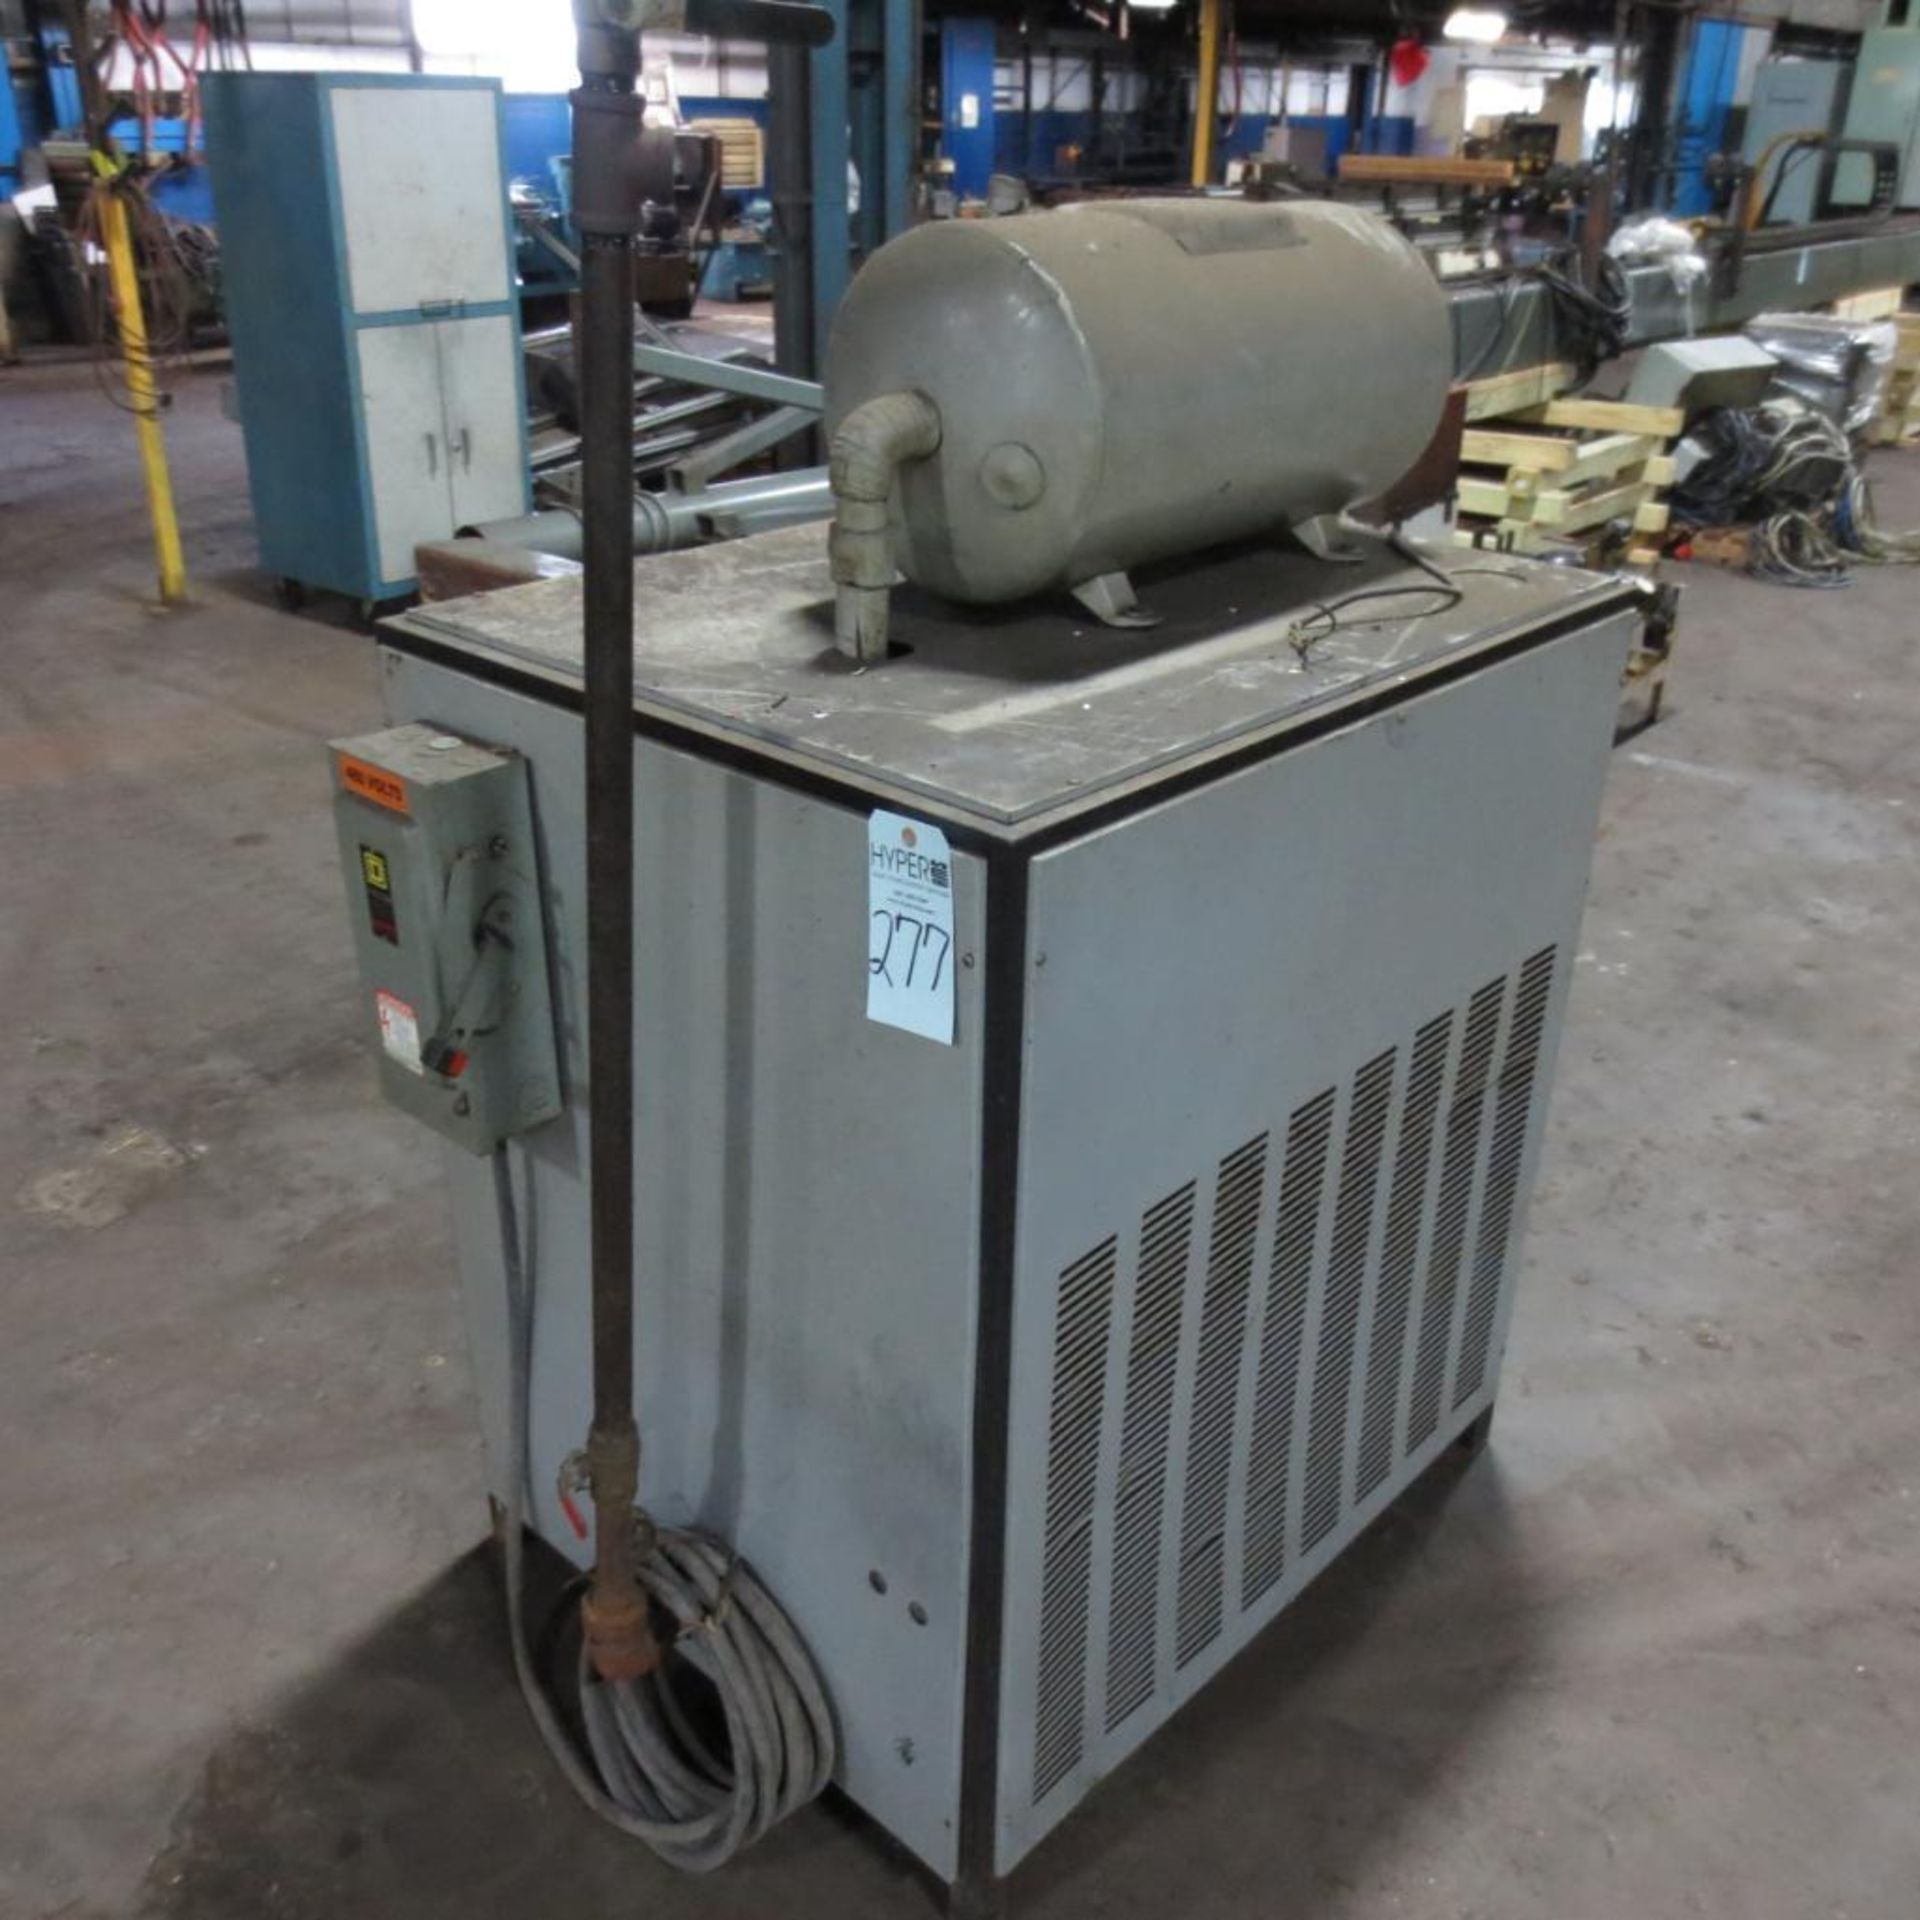 Pneumatech PAC-300 Chiller, 3 NT Cap.. Loading Fee is $25.00